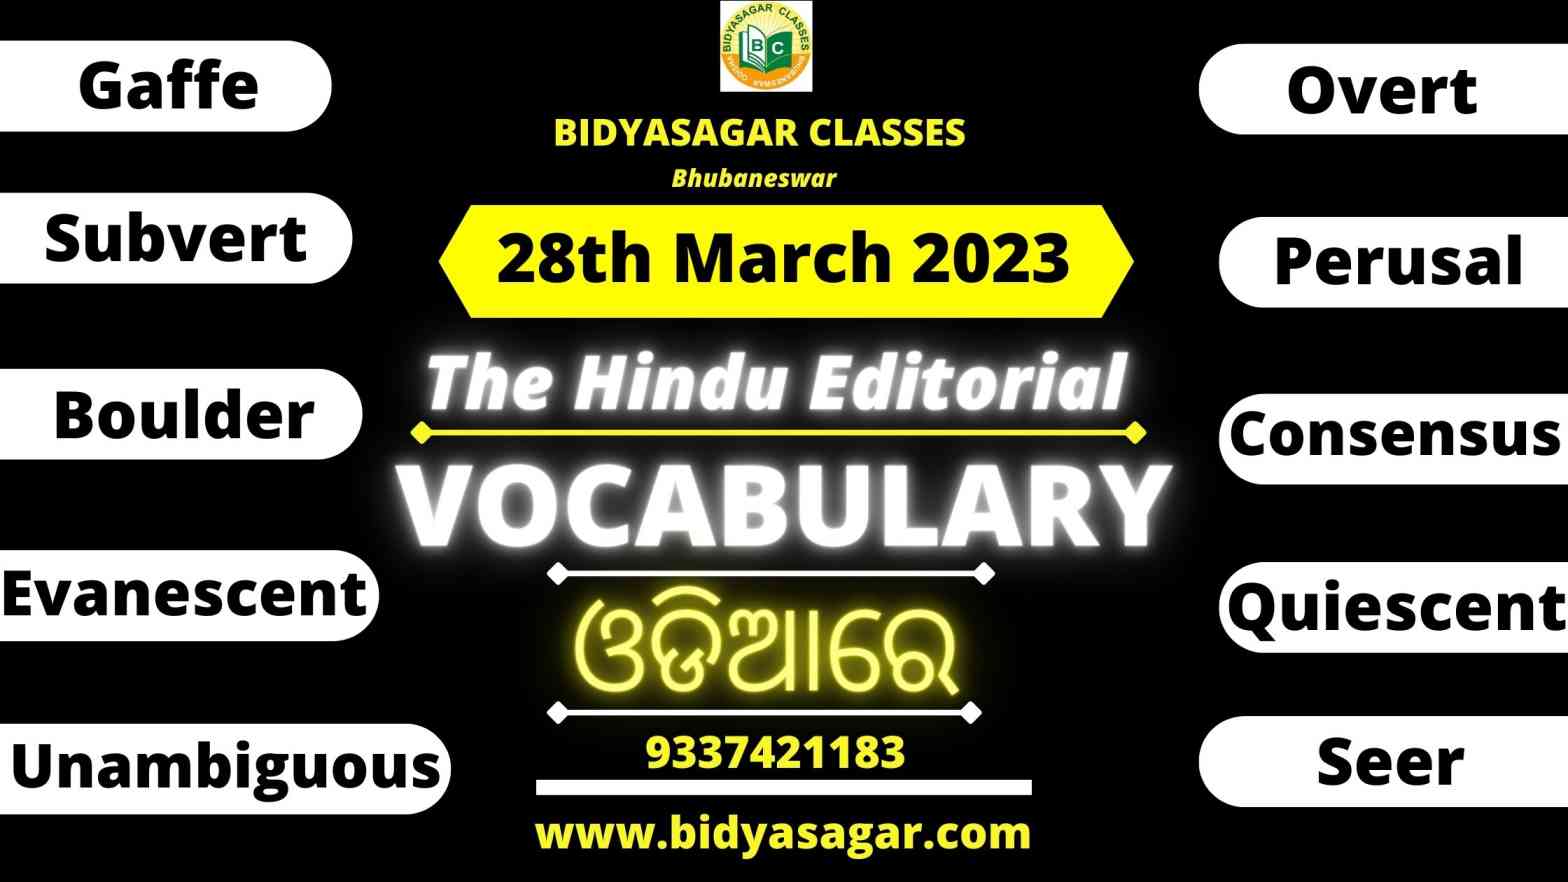 The Hindu Editorial Vocabulary of 28th March 2023